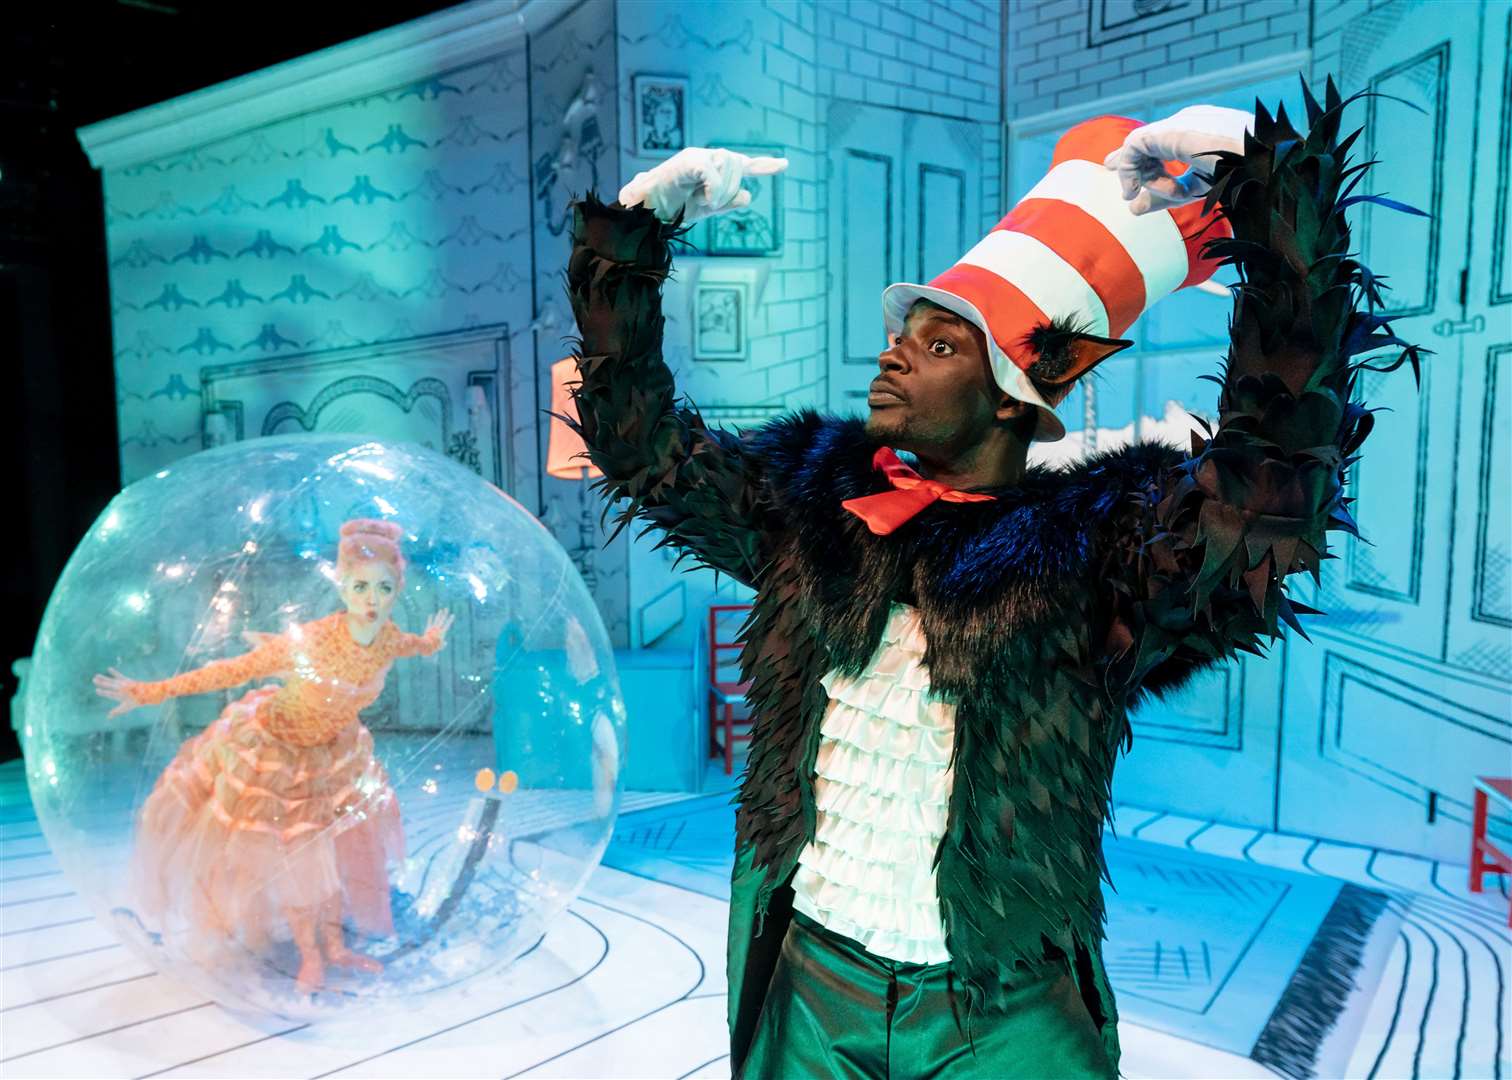 Charley Magalit and Nana Amoo-Gottfried in The Cat in the Hat (7502309)